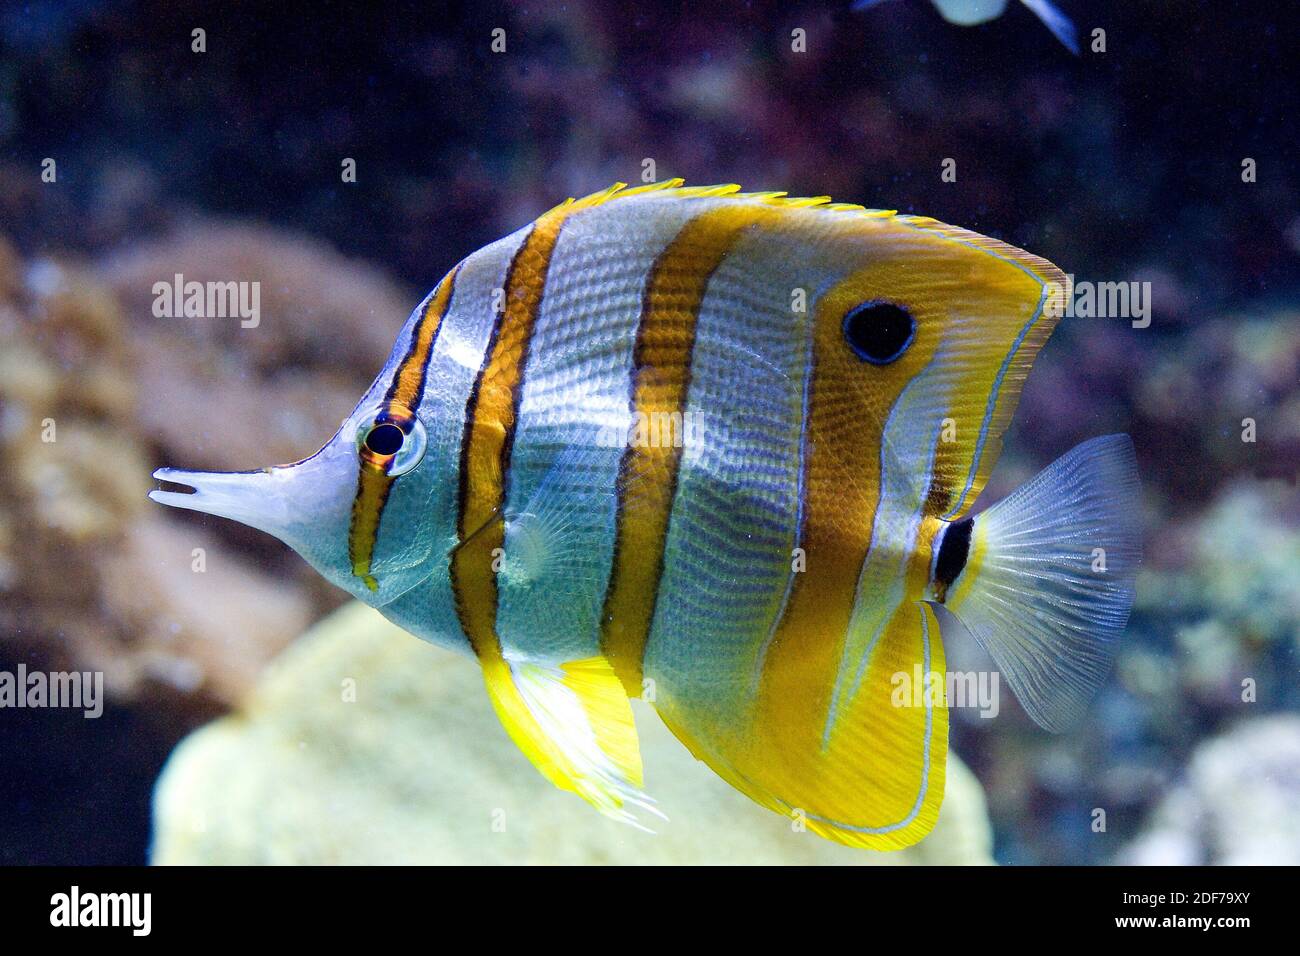 Copperband butterflyfish (Chelmon rostratus) is a marine fish native to tropical Indo-Pacific Ocean.. Stock Photo